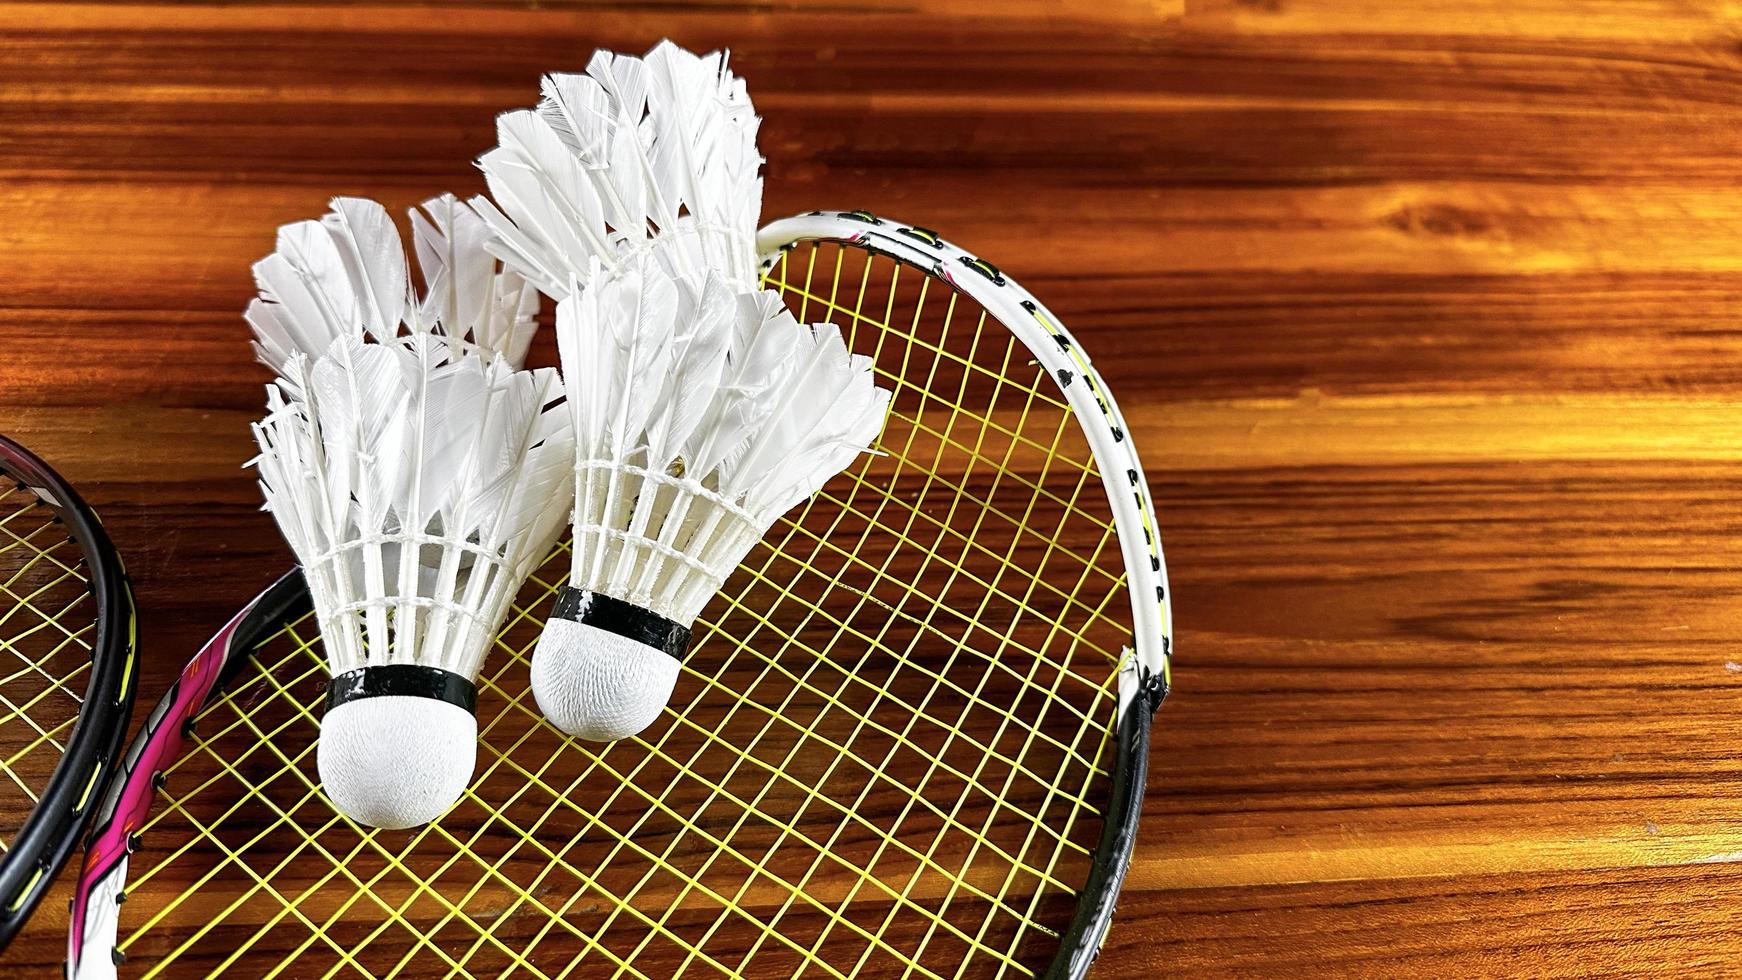 Close up of broken badminton rackets and white badminton shuttle cocks on brown wooden background photo